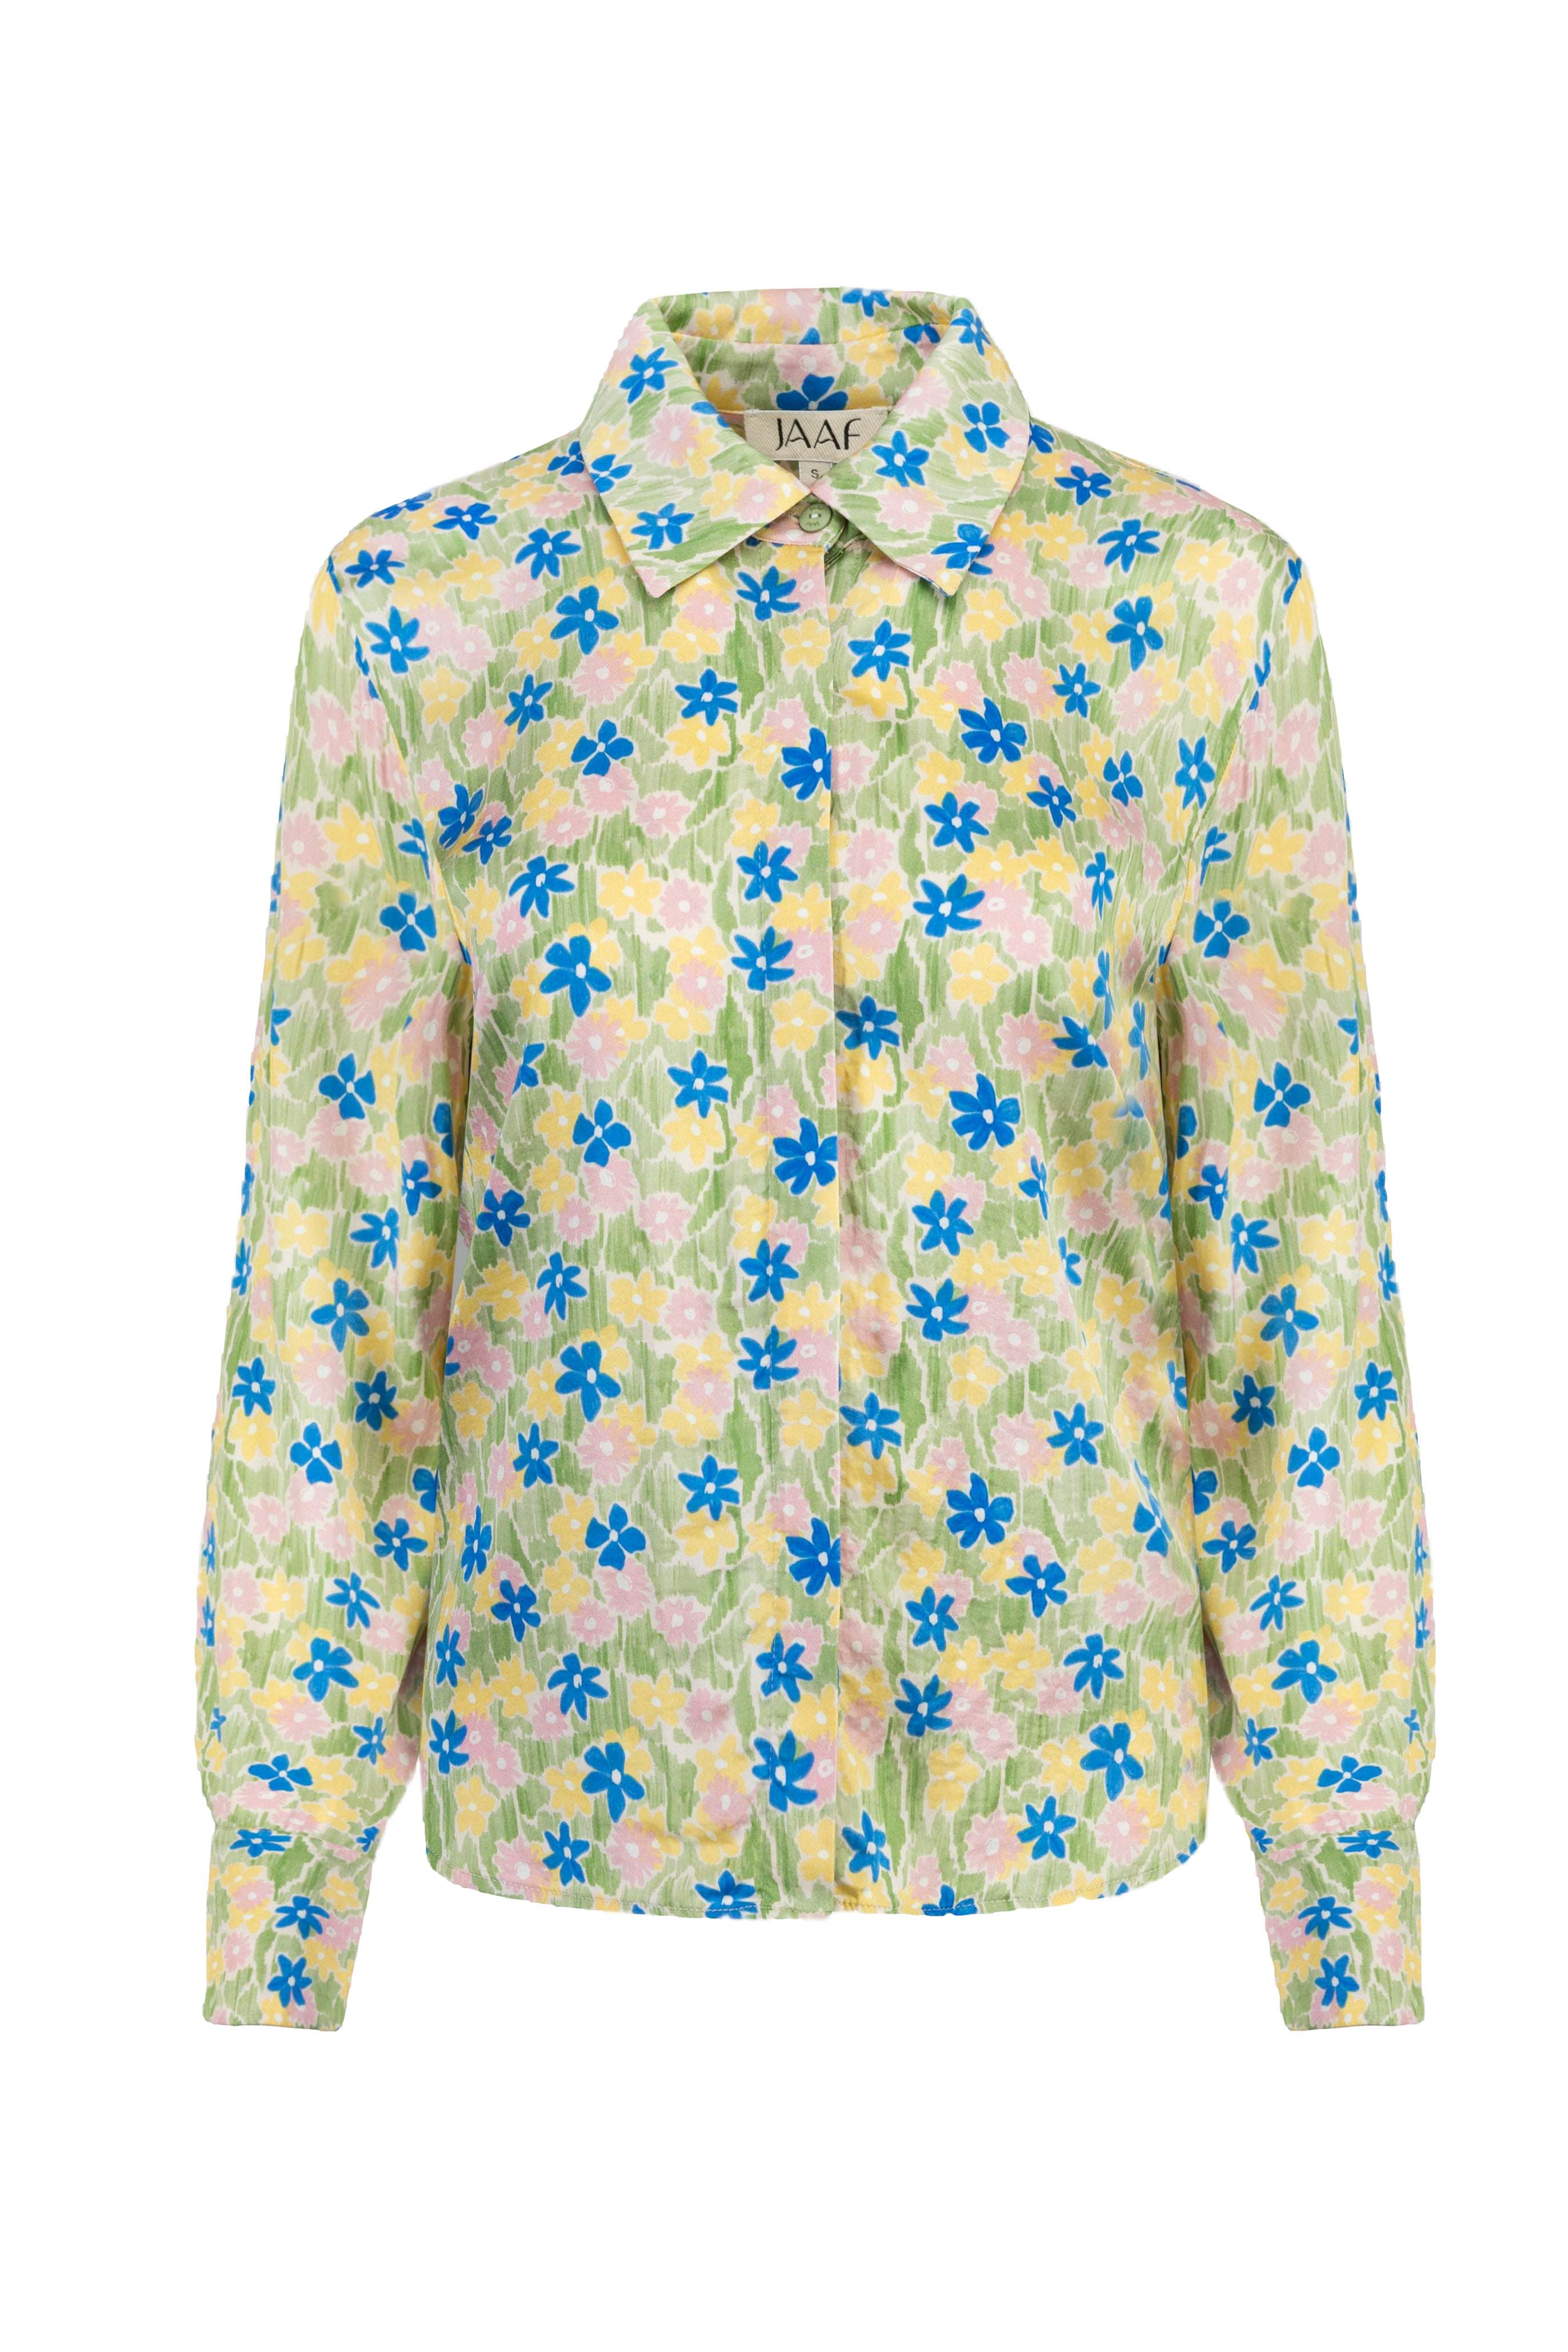 Jaaf Relaxed Shirt In Meadow Print In Multi Colour